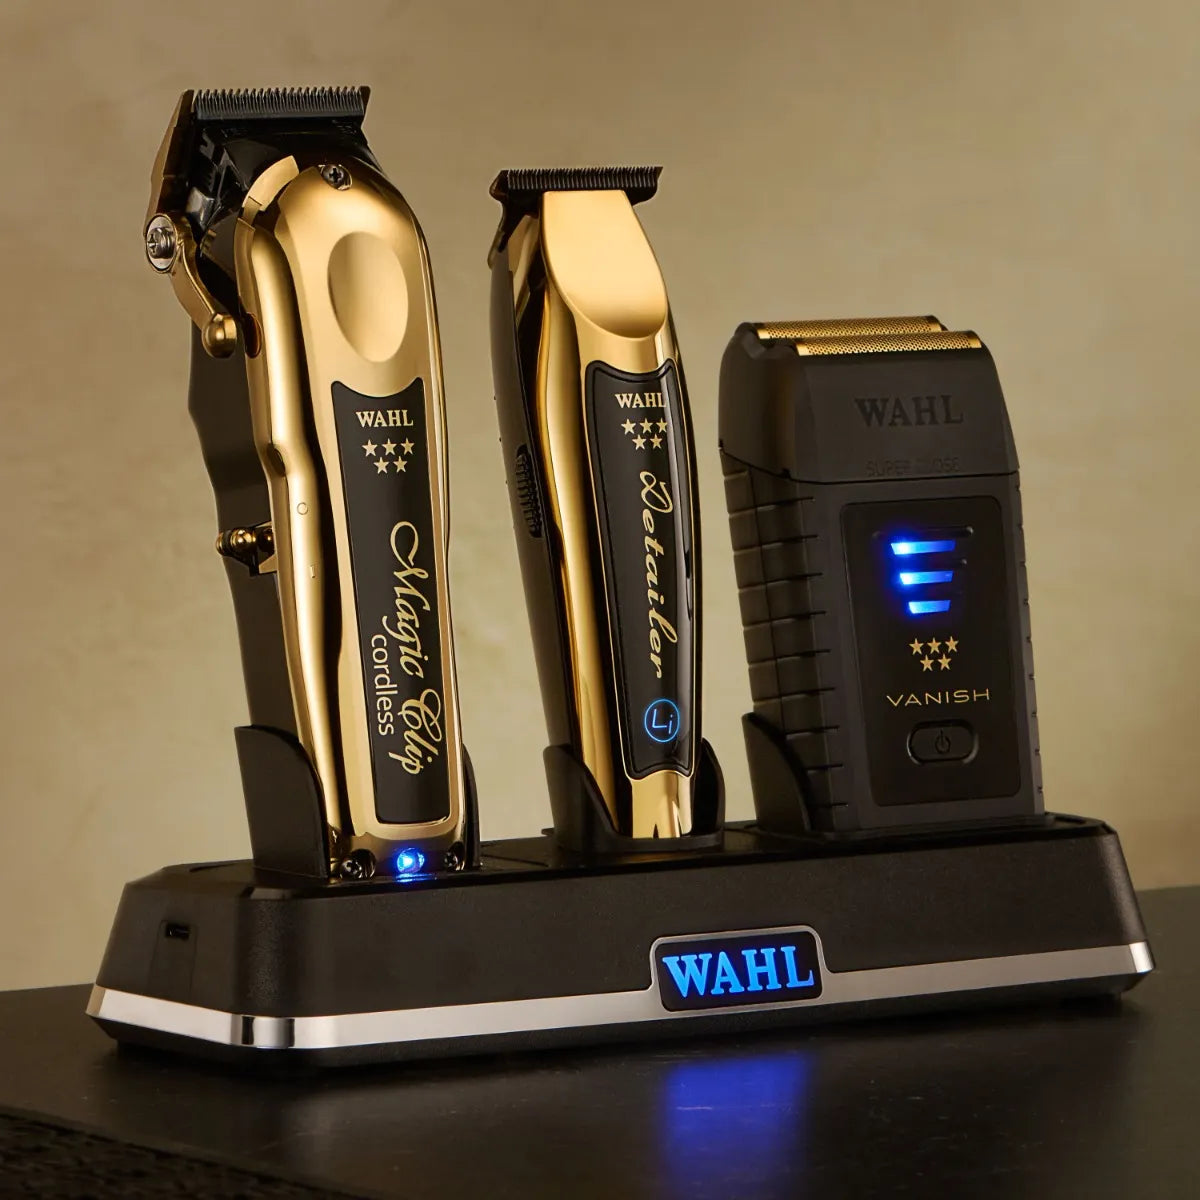 Wahl Gold Cordless Magic Clip, Gold Cordless Detailer Trimmer &amp;  Vanish Shaver  Special Combo